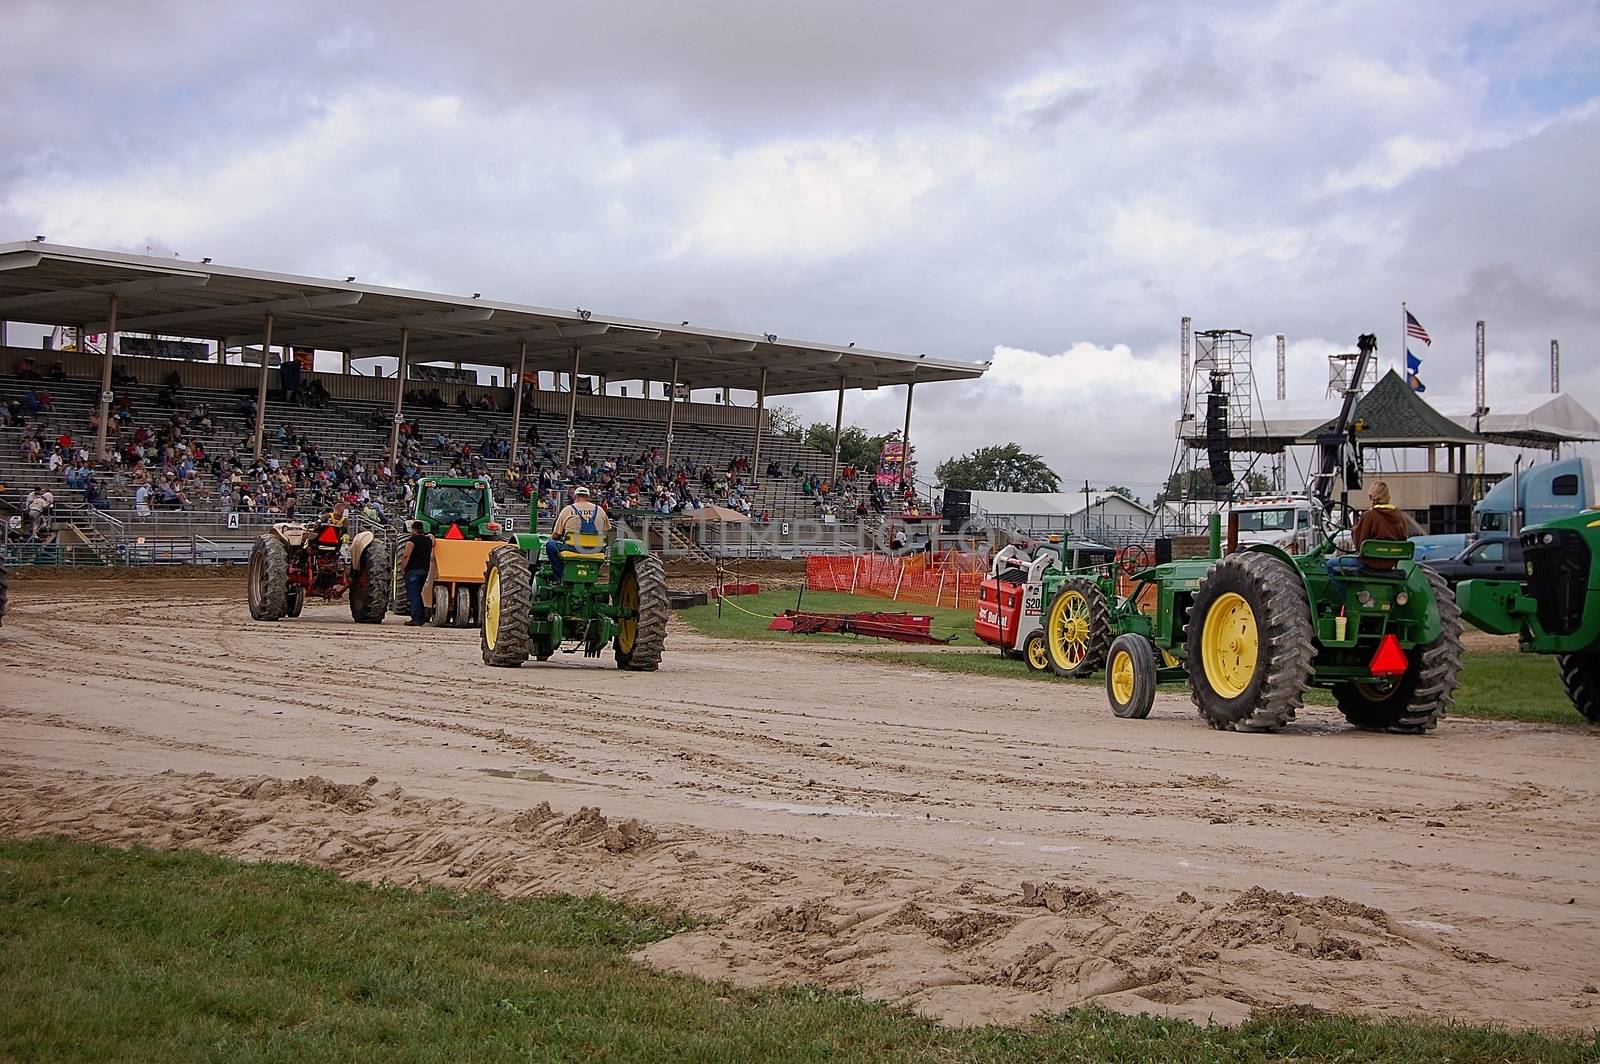 This is a group of tractor's awaiting there turn during a tractor pull at a county fair.